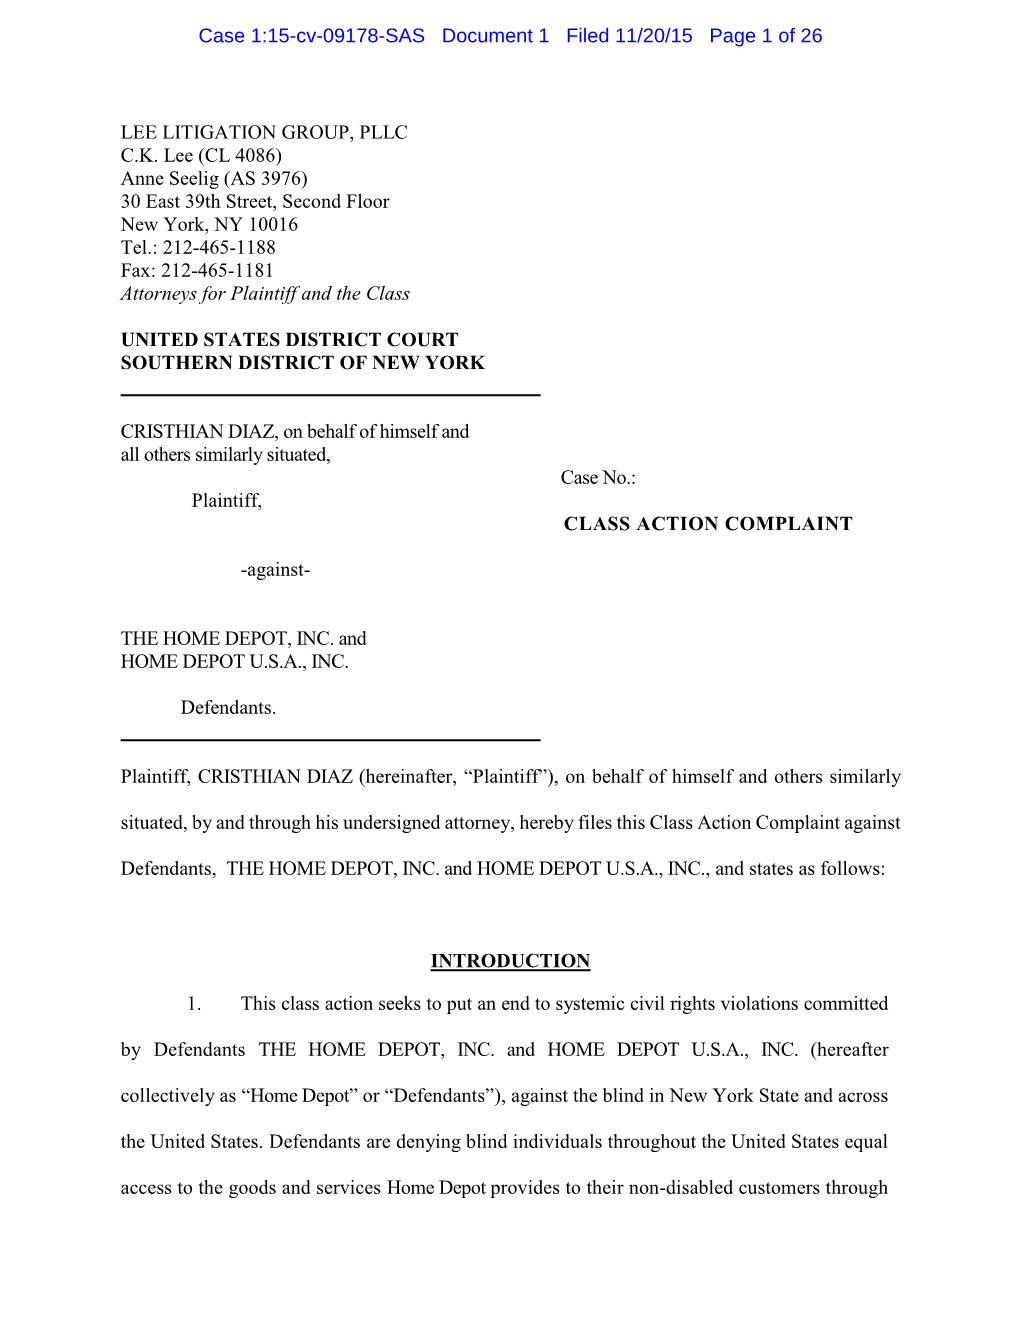 Case 1:15-Cv-09178-SAS Document 1 Filed 11/20/15 Page 1 of 26